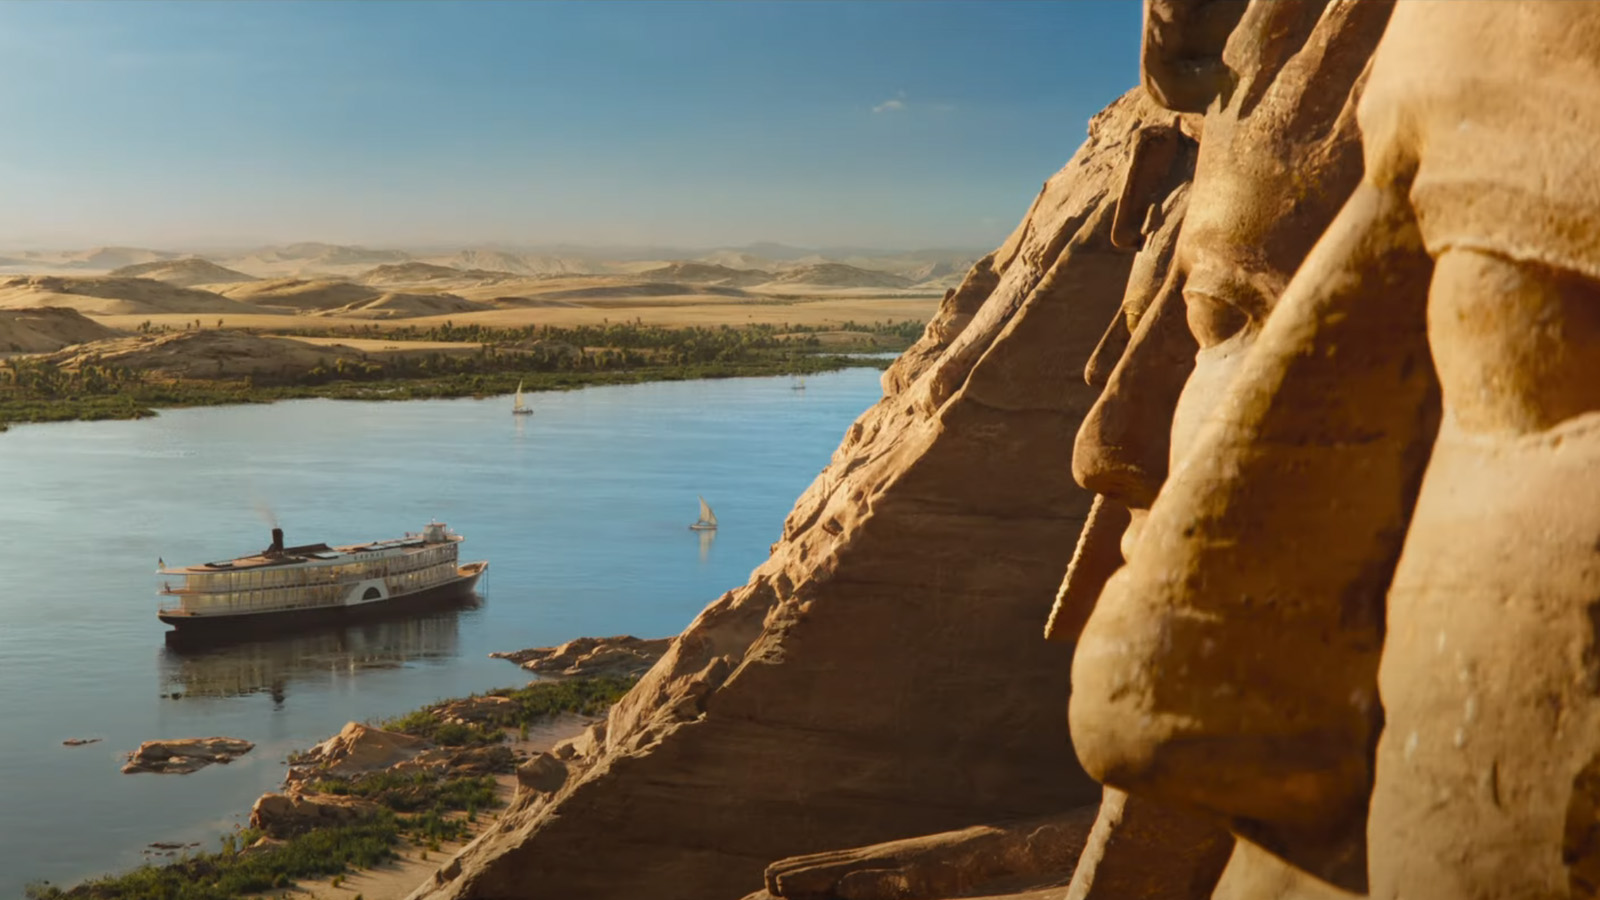 The Karnak travels upriver in Death on the Nile. Image © 20th Century Studios